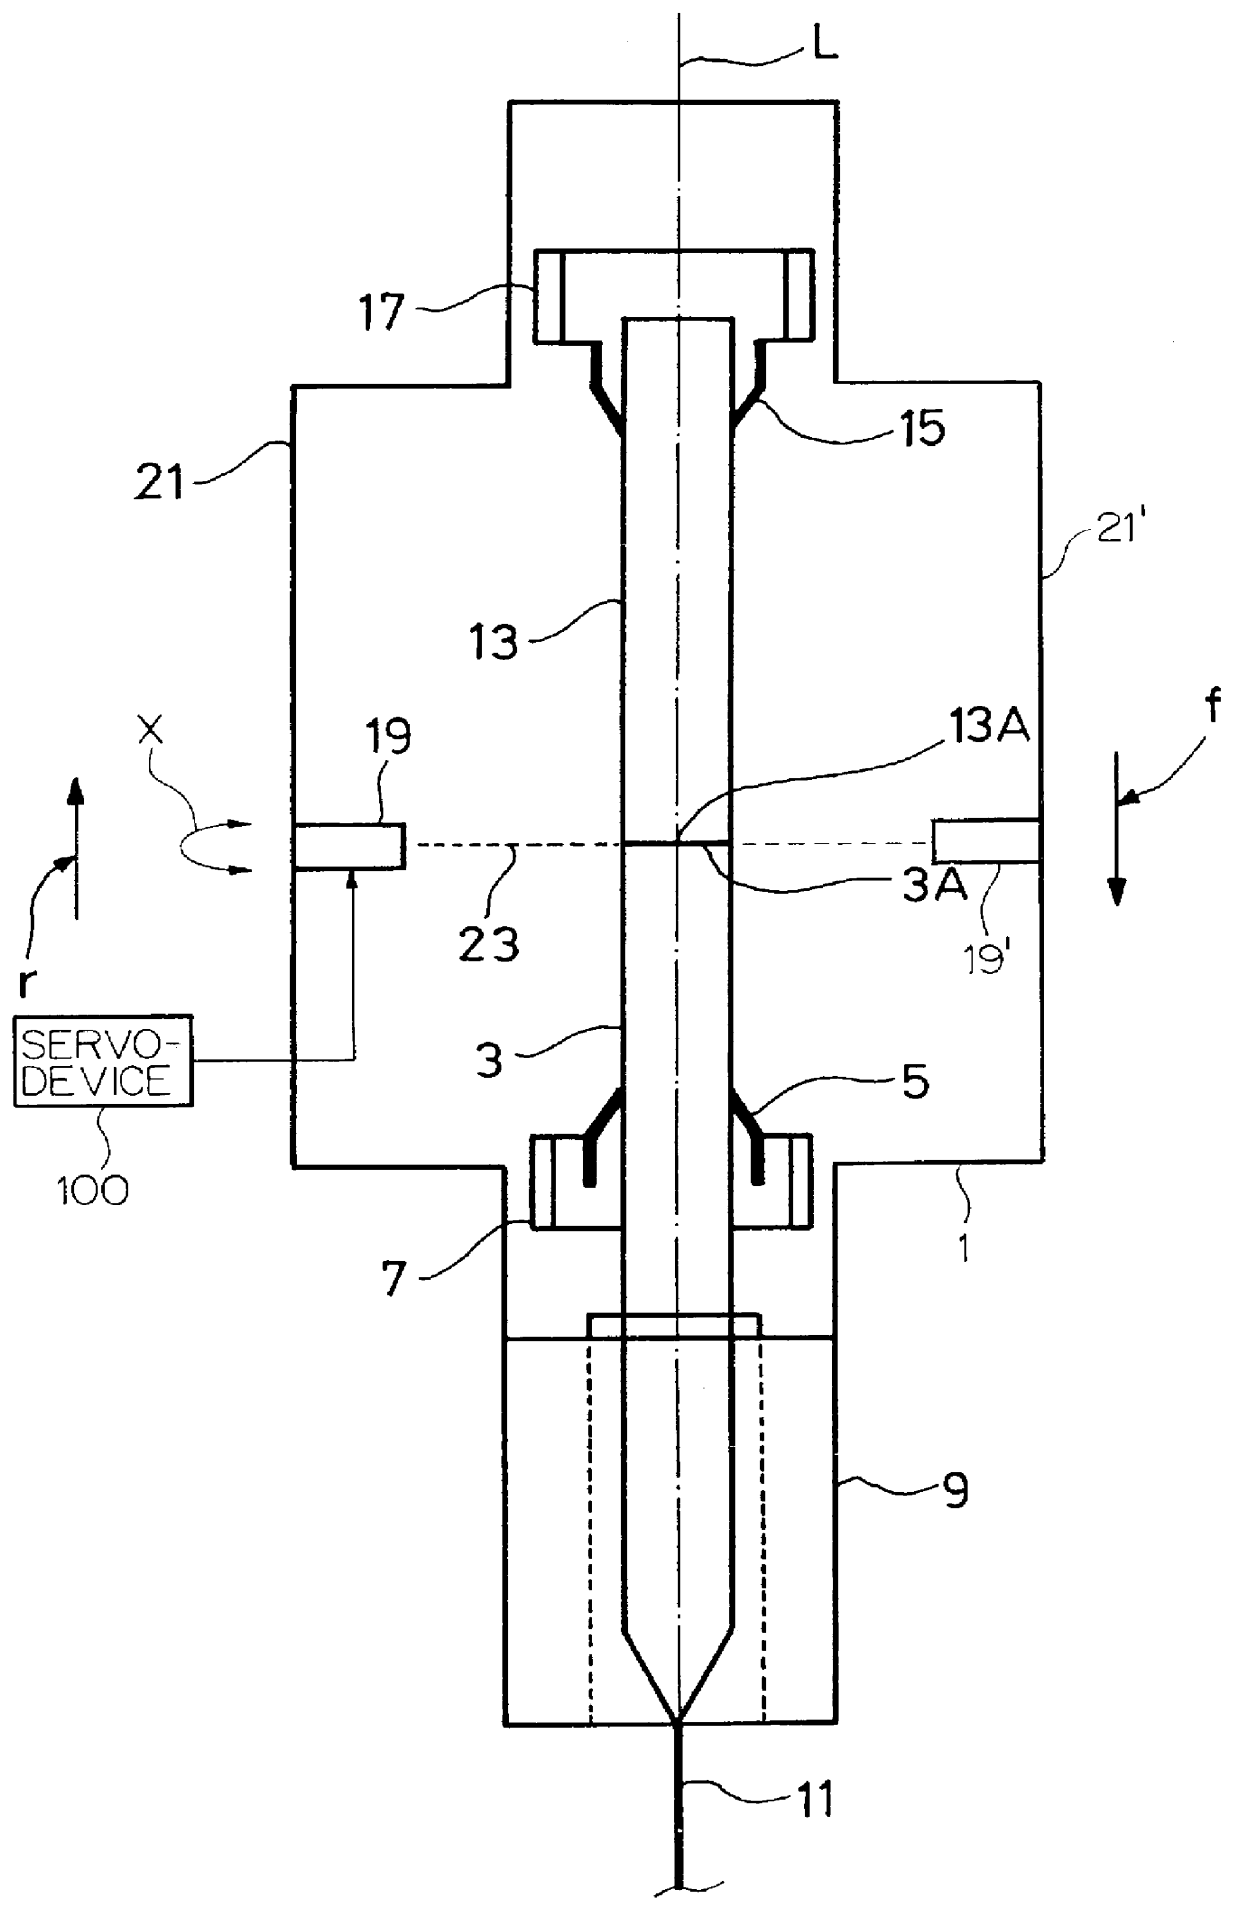 Method of drawing fiber continuously by butt welding optical fiber preforms